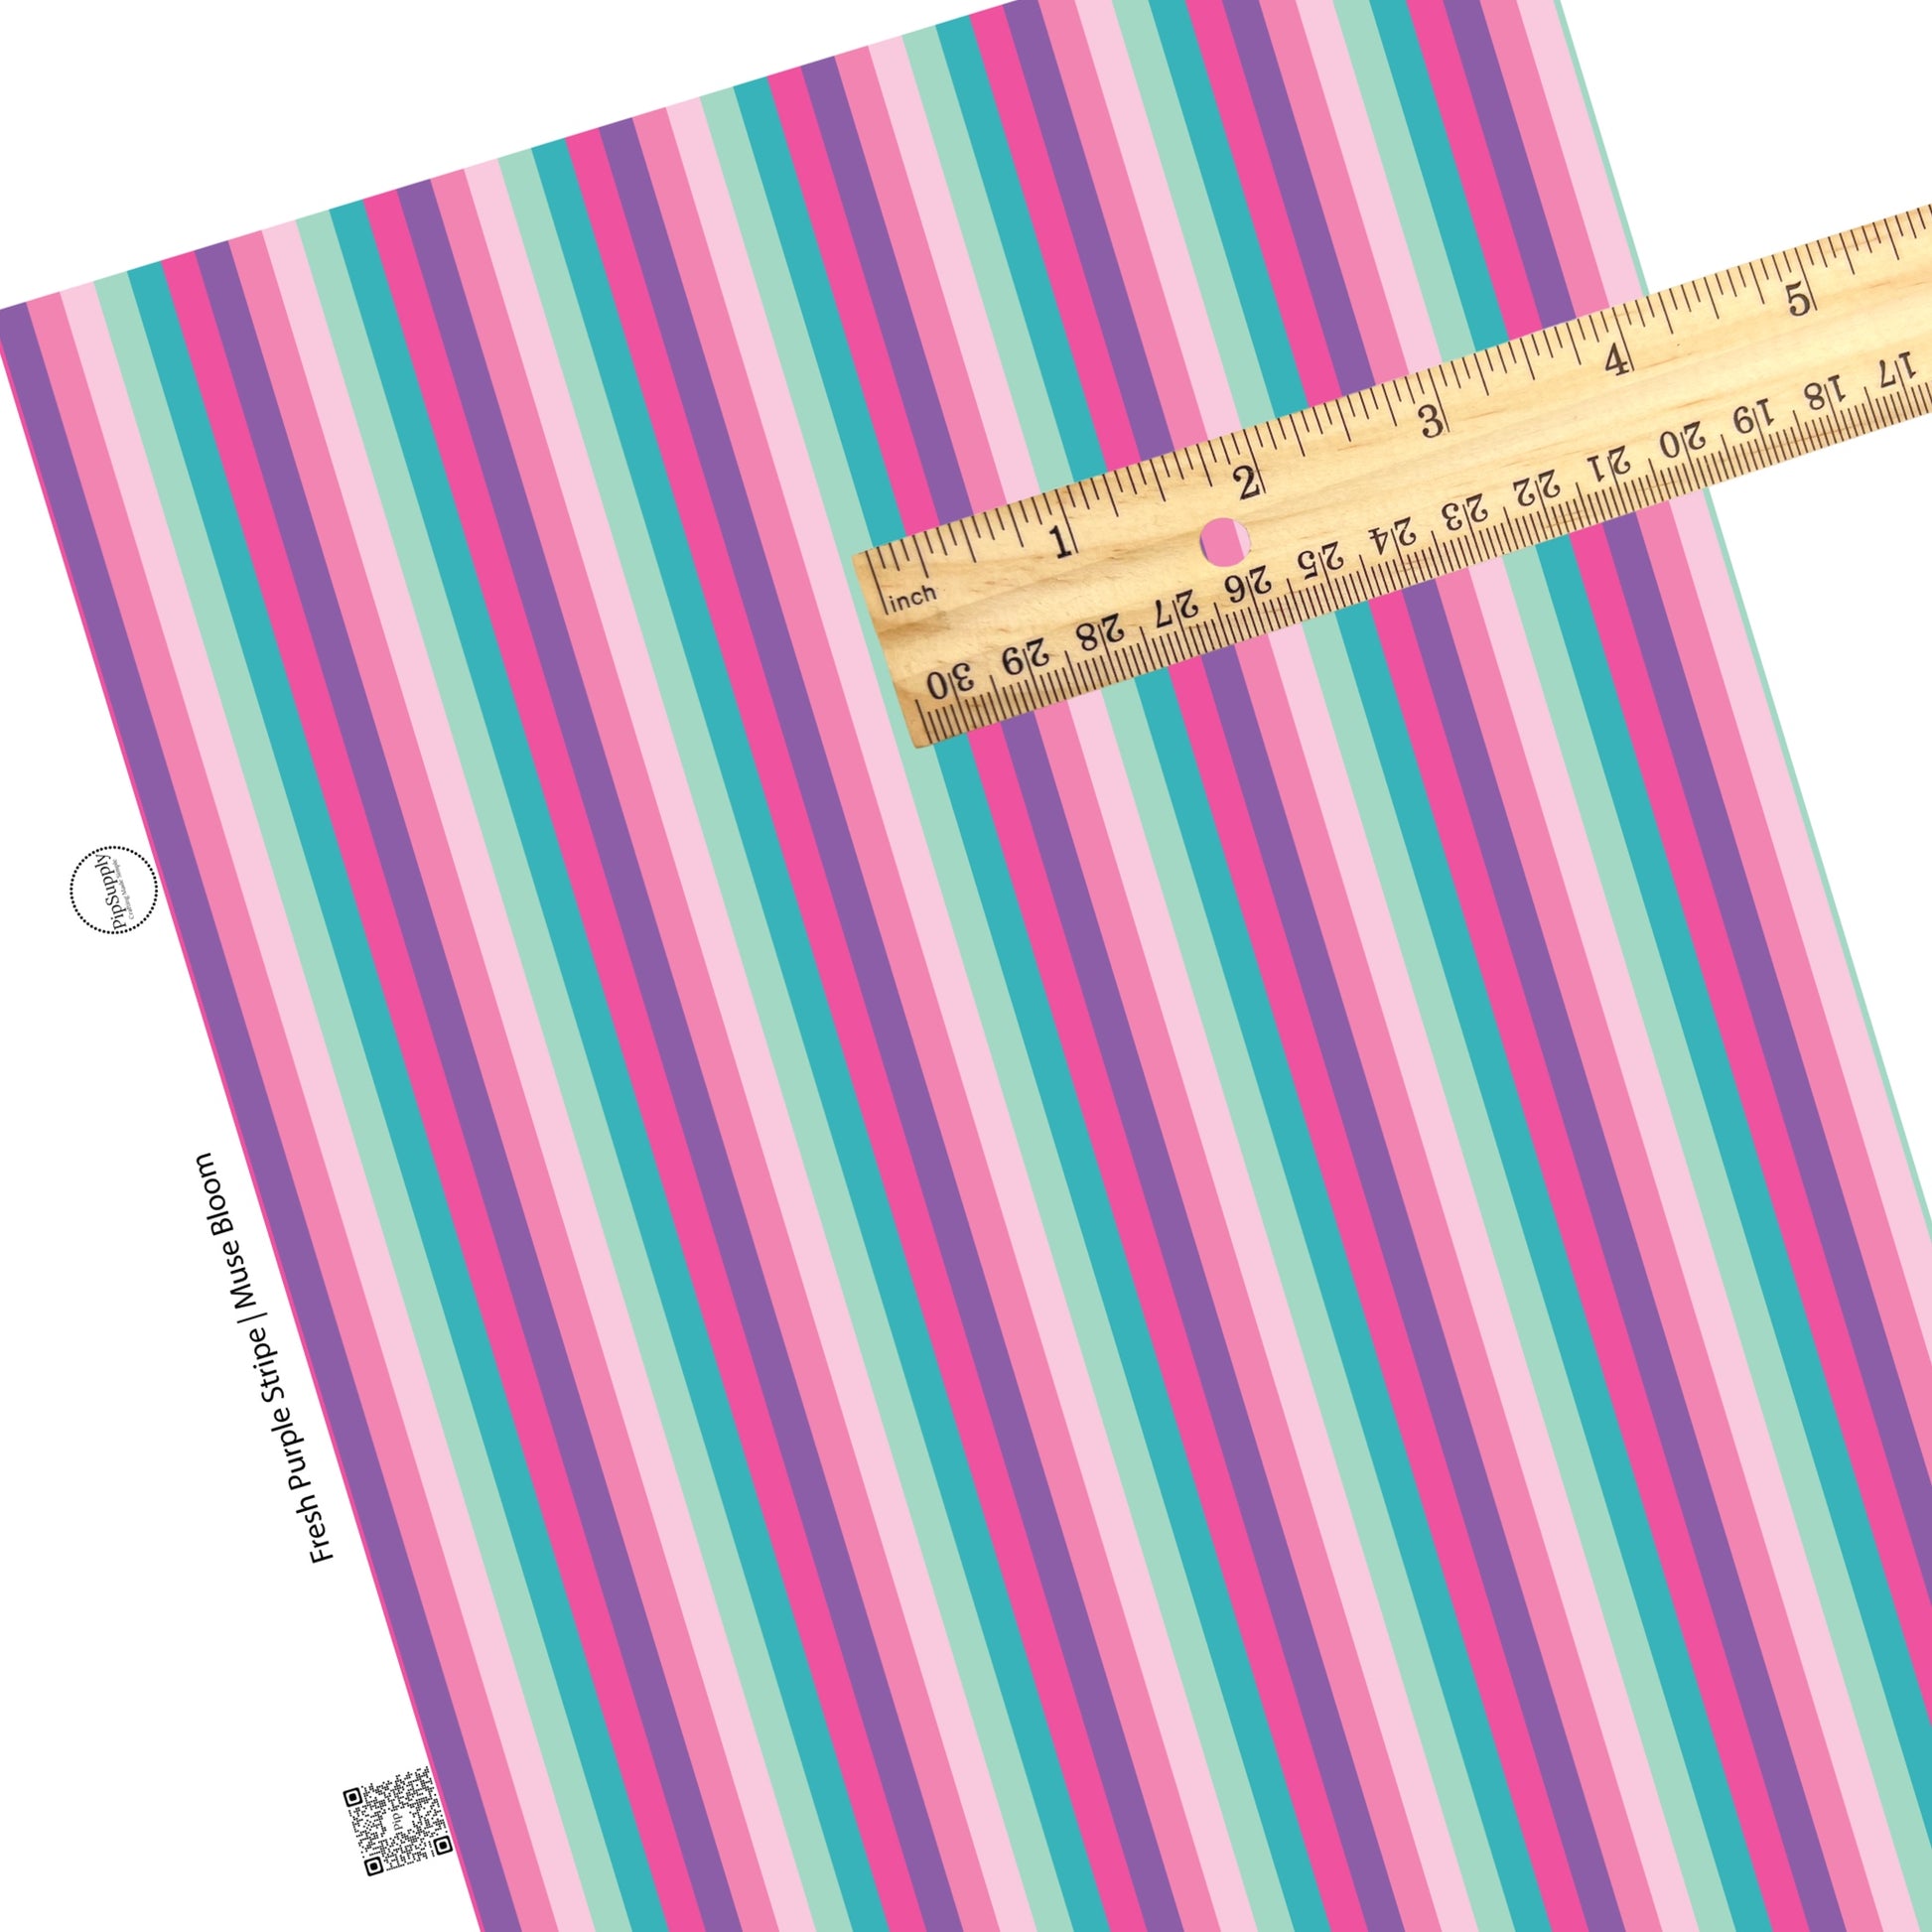 These stripe themed teal and pink faux leather sheets contain the following design elements: purple, pink, and teal stripes.